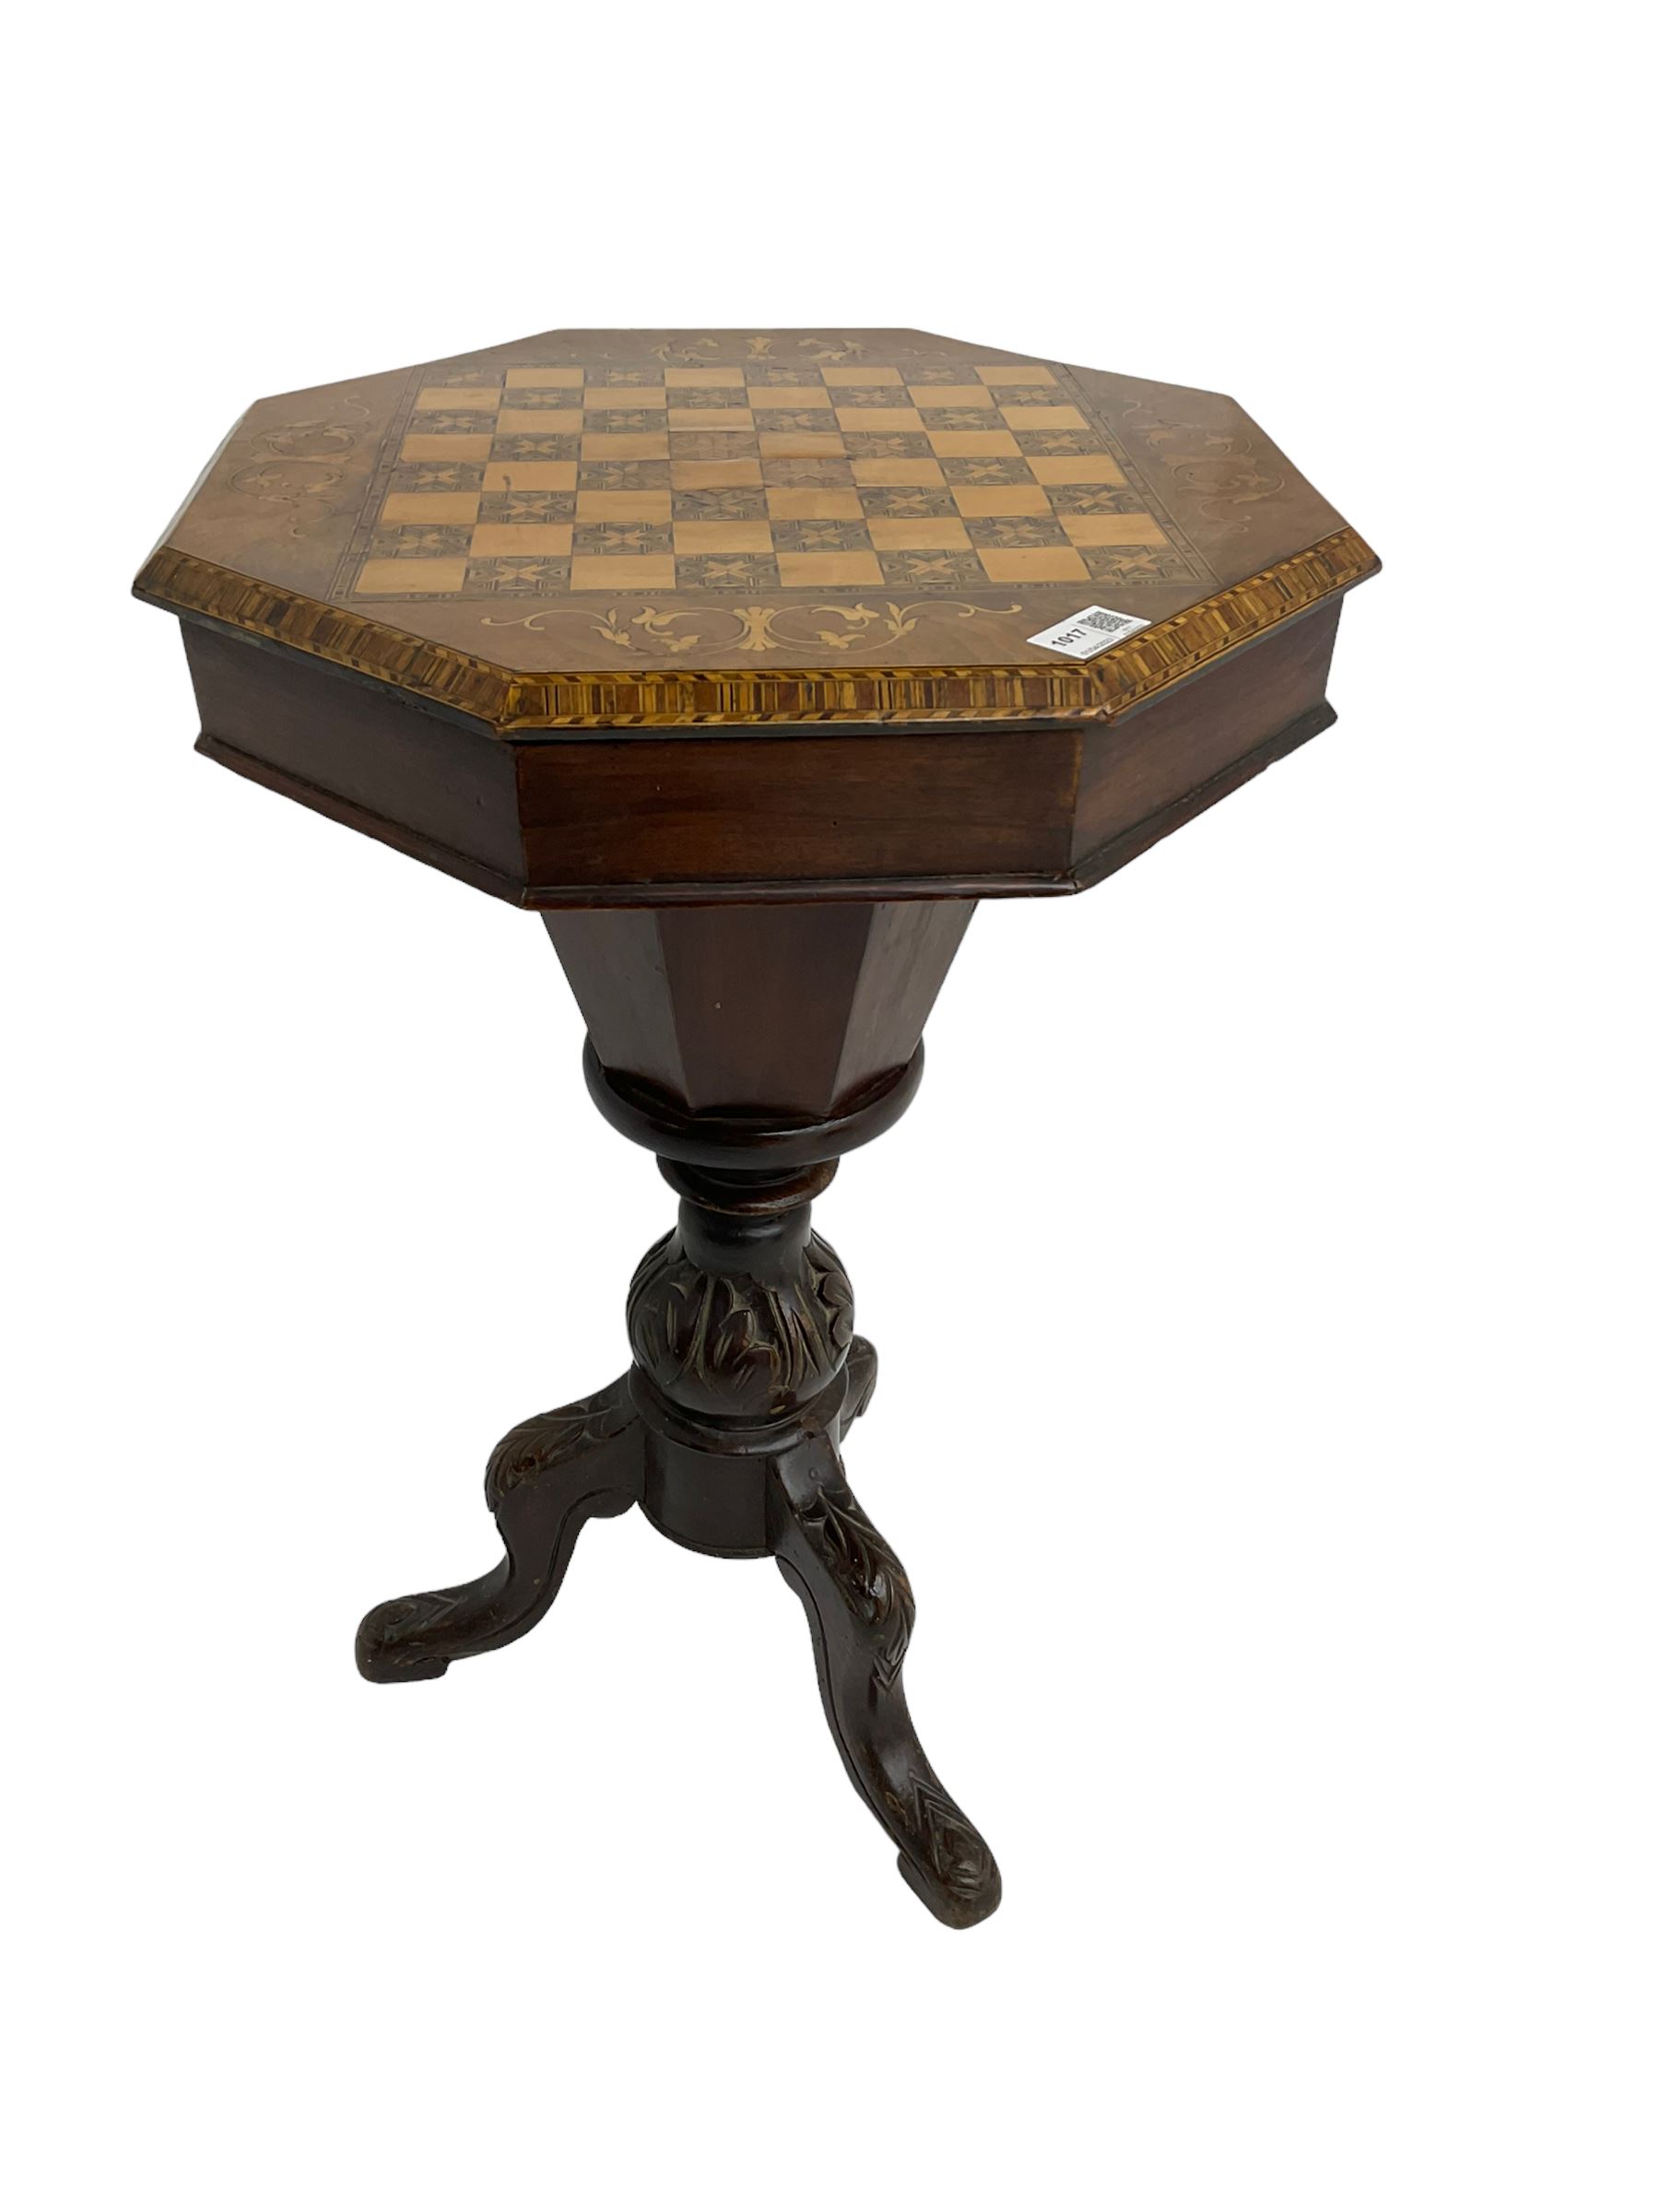 Late 19th century inlaid walnut sewing or work table - Image 3 of 6